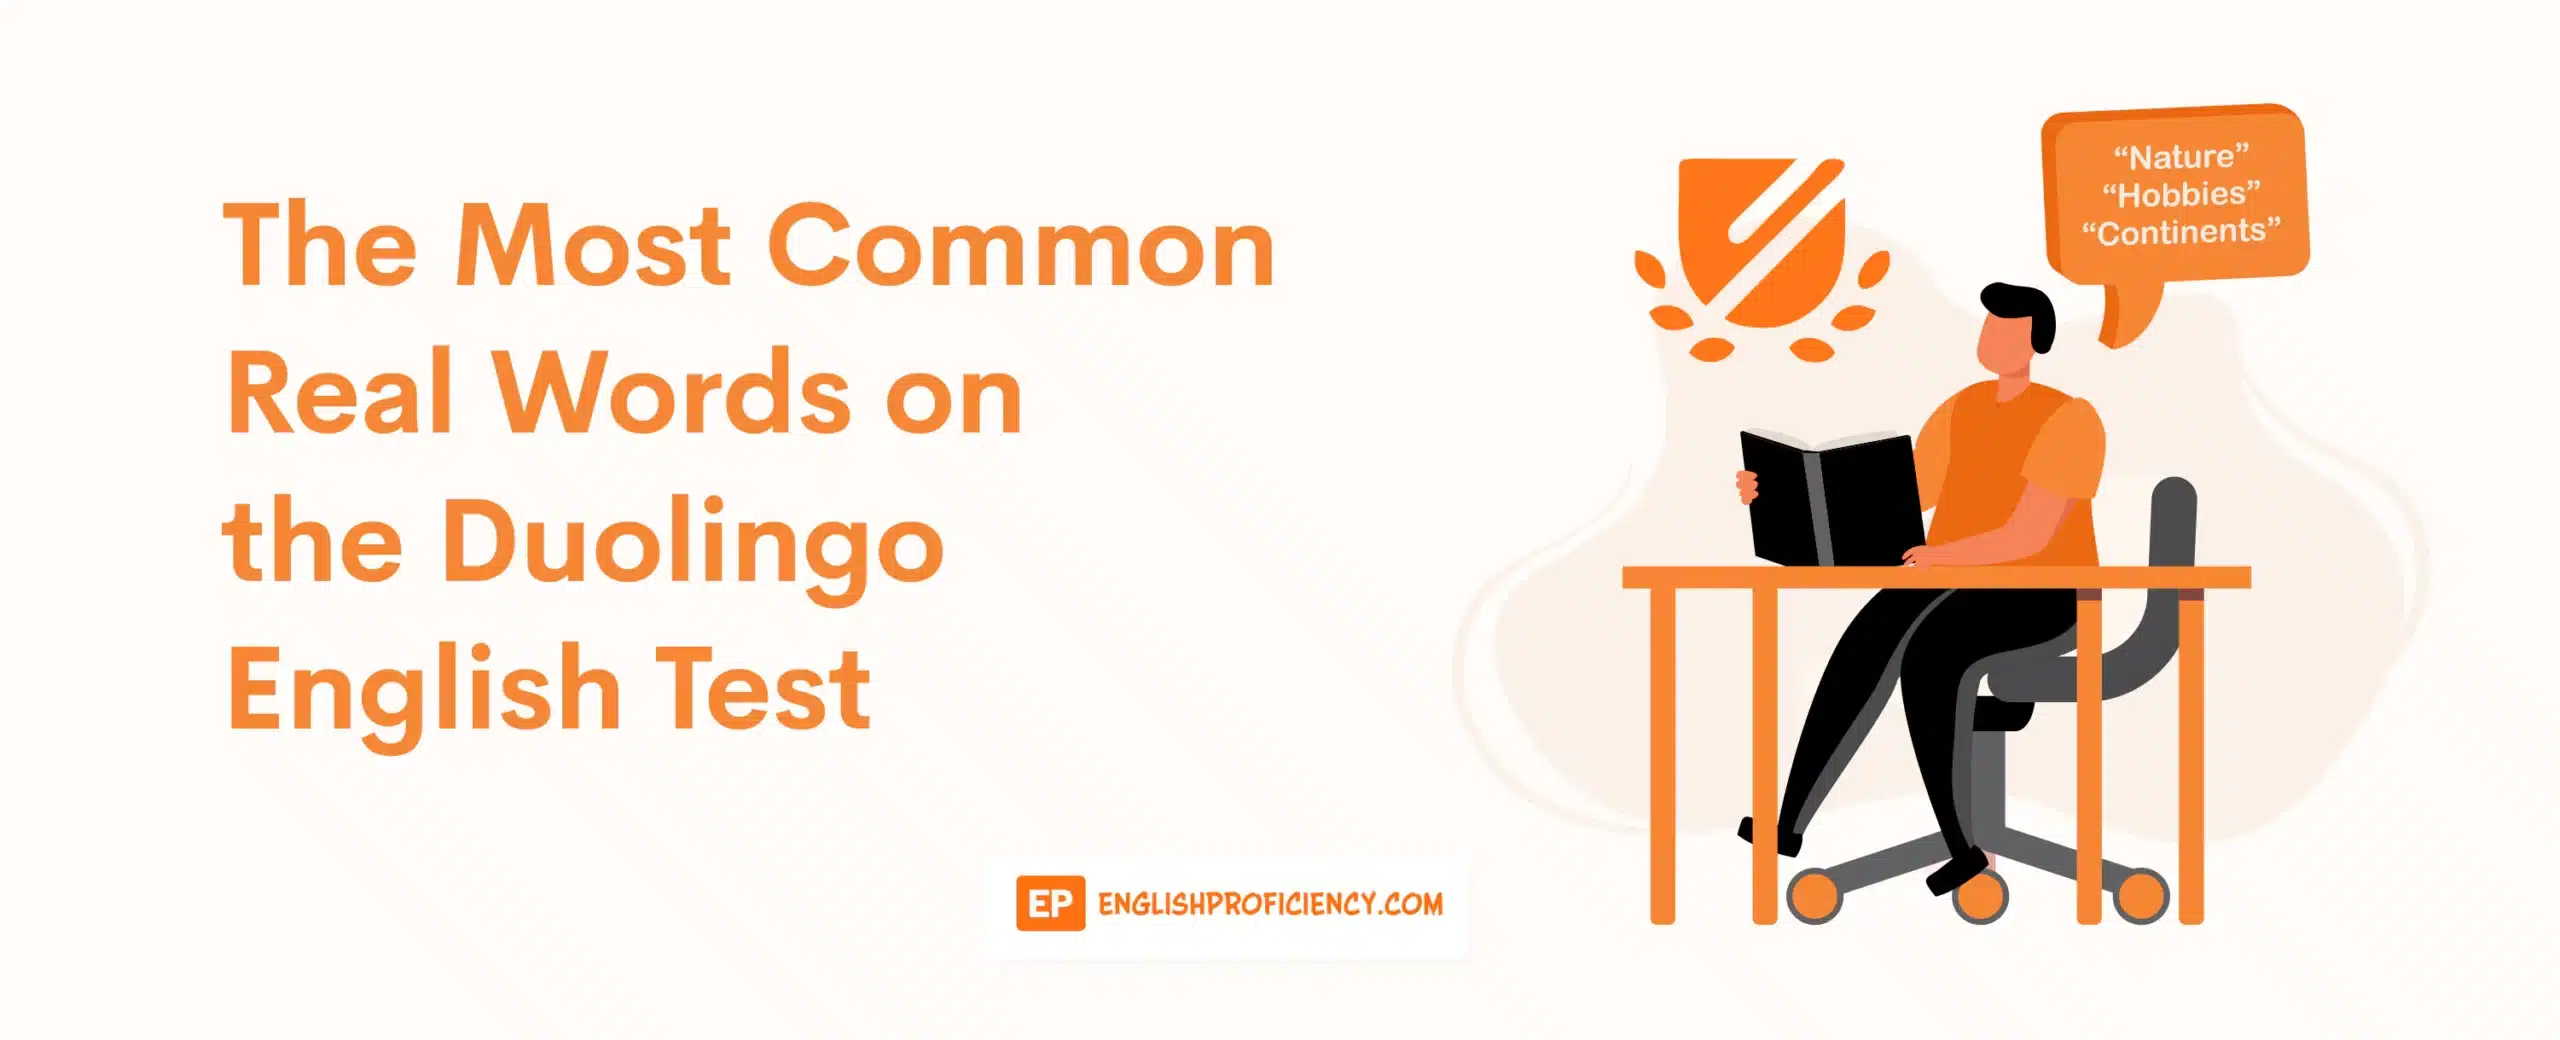 The Most Common Real Words on the Duolingo English Test